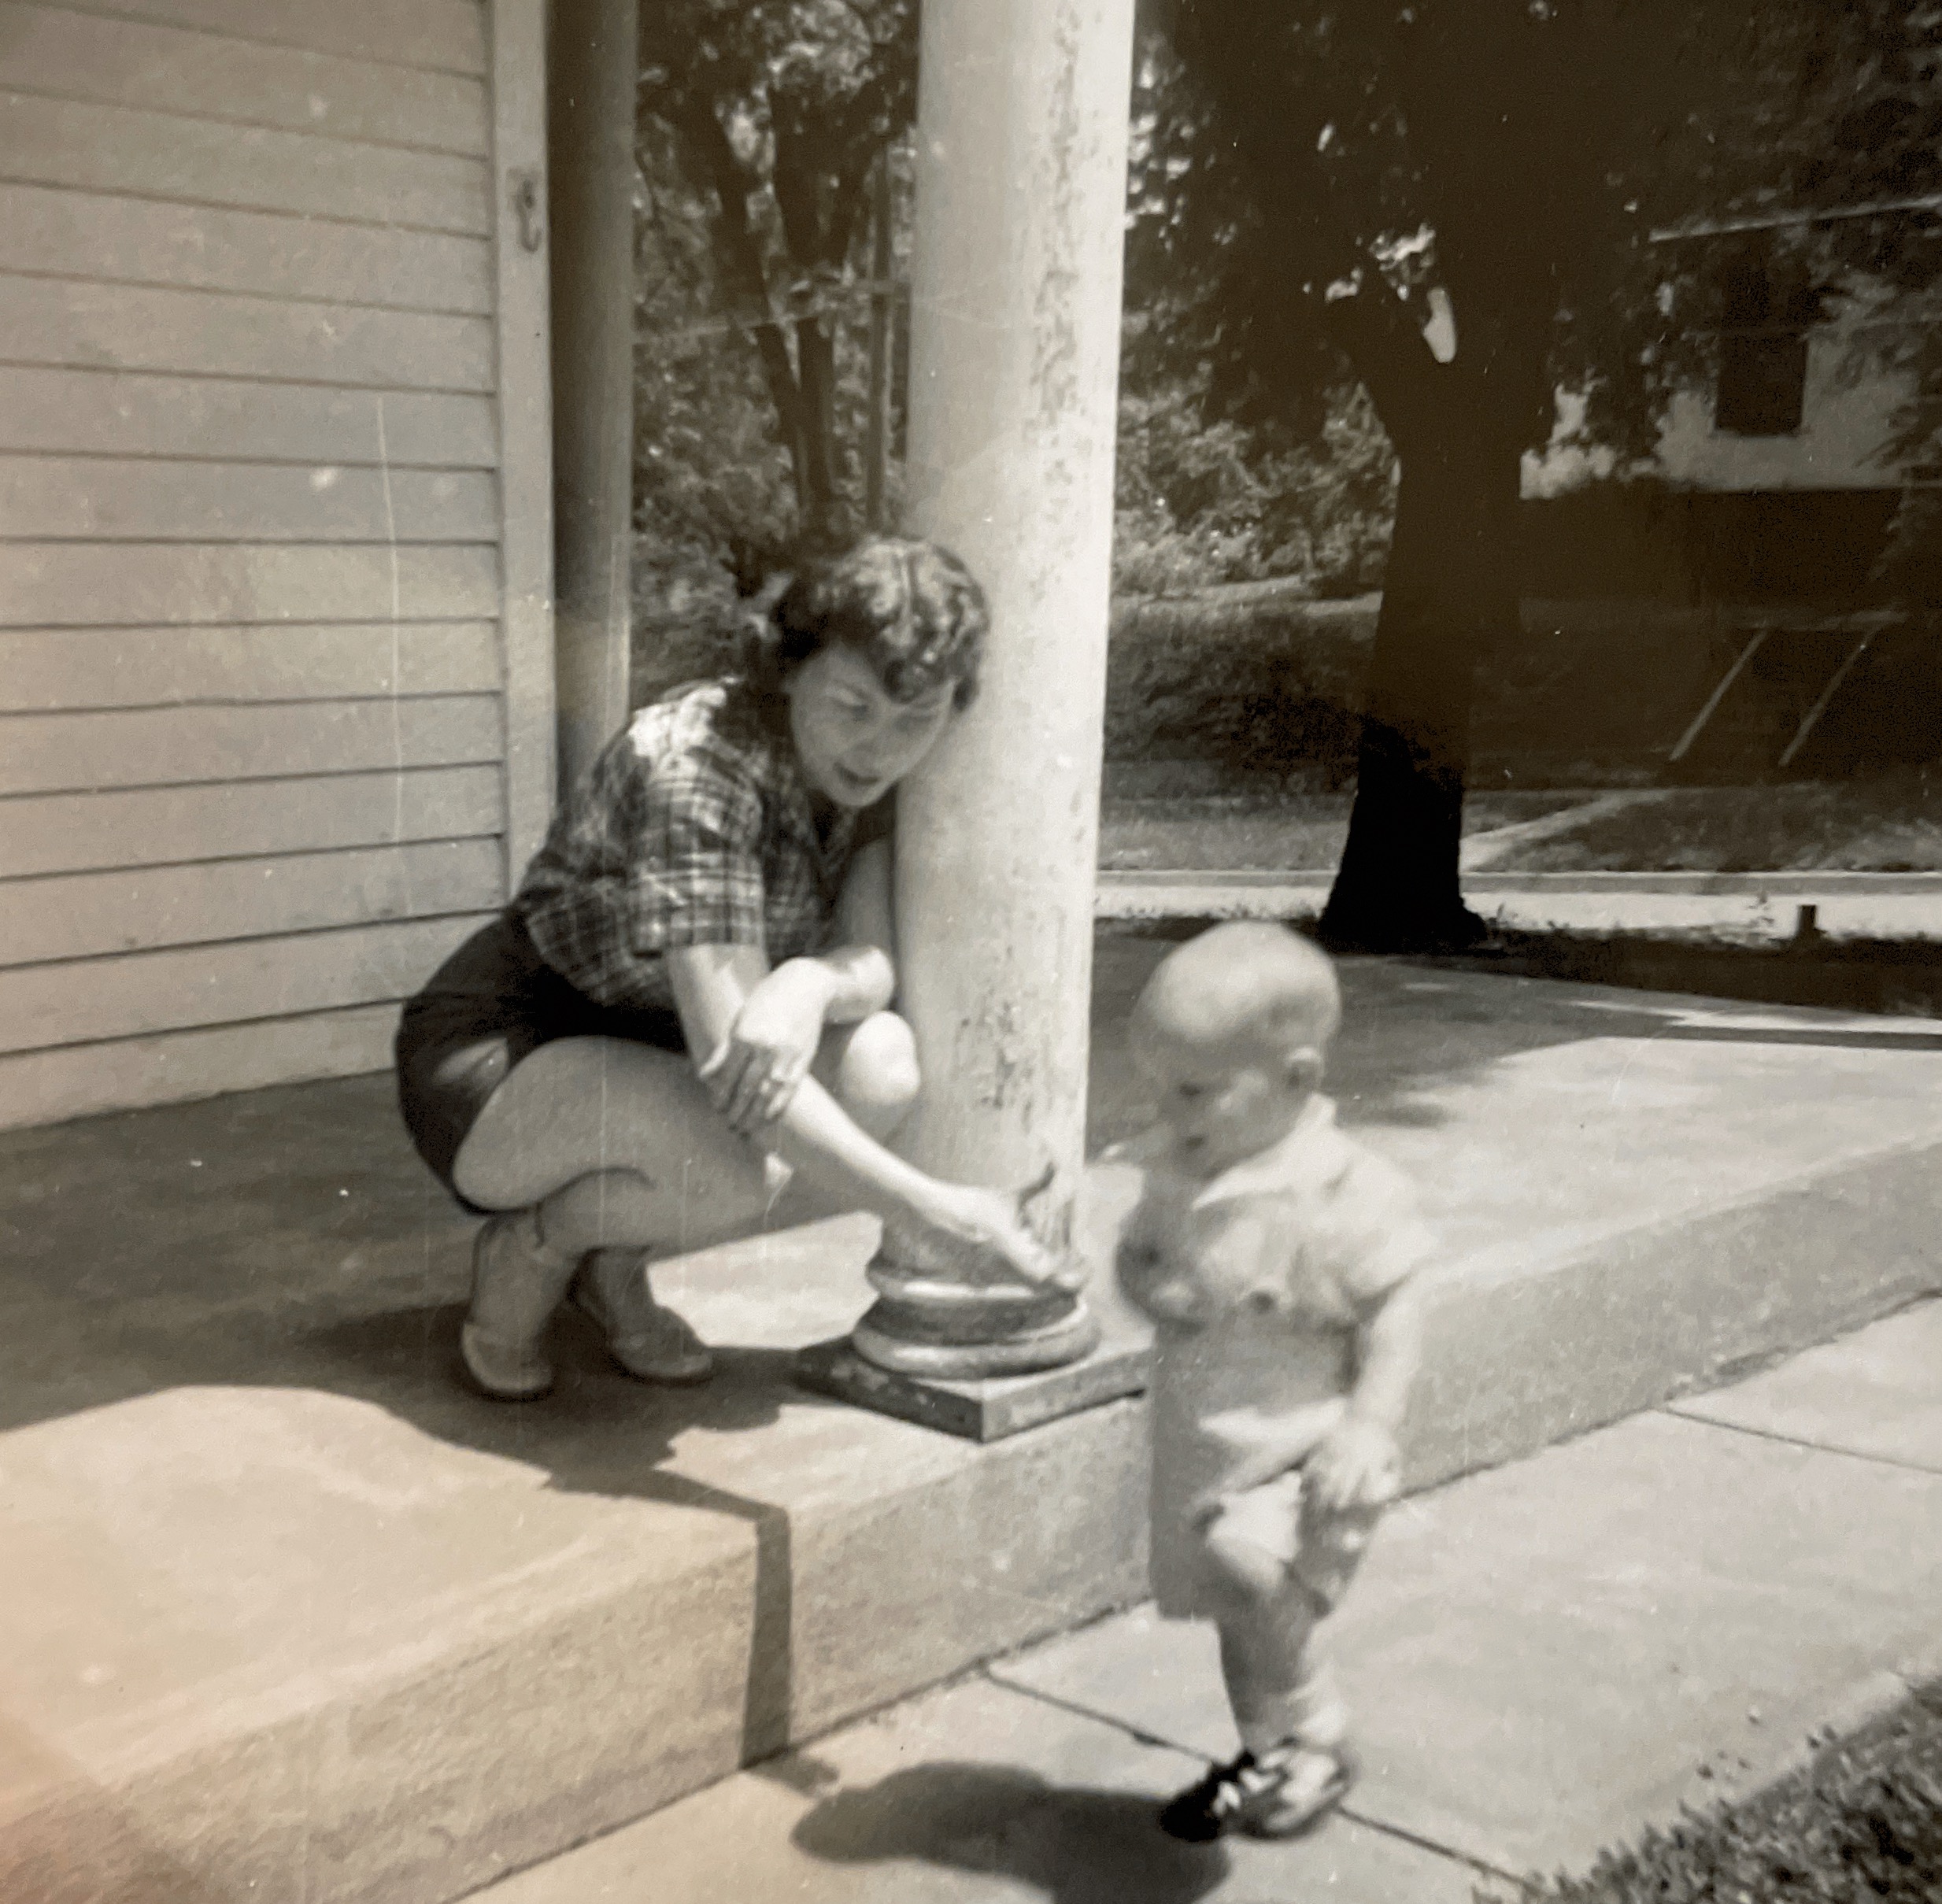 Aunt Jo and Uncle Tom in 1954 at great grandma Willy’s house.